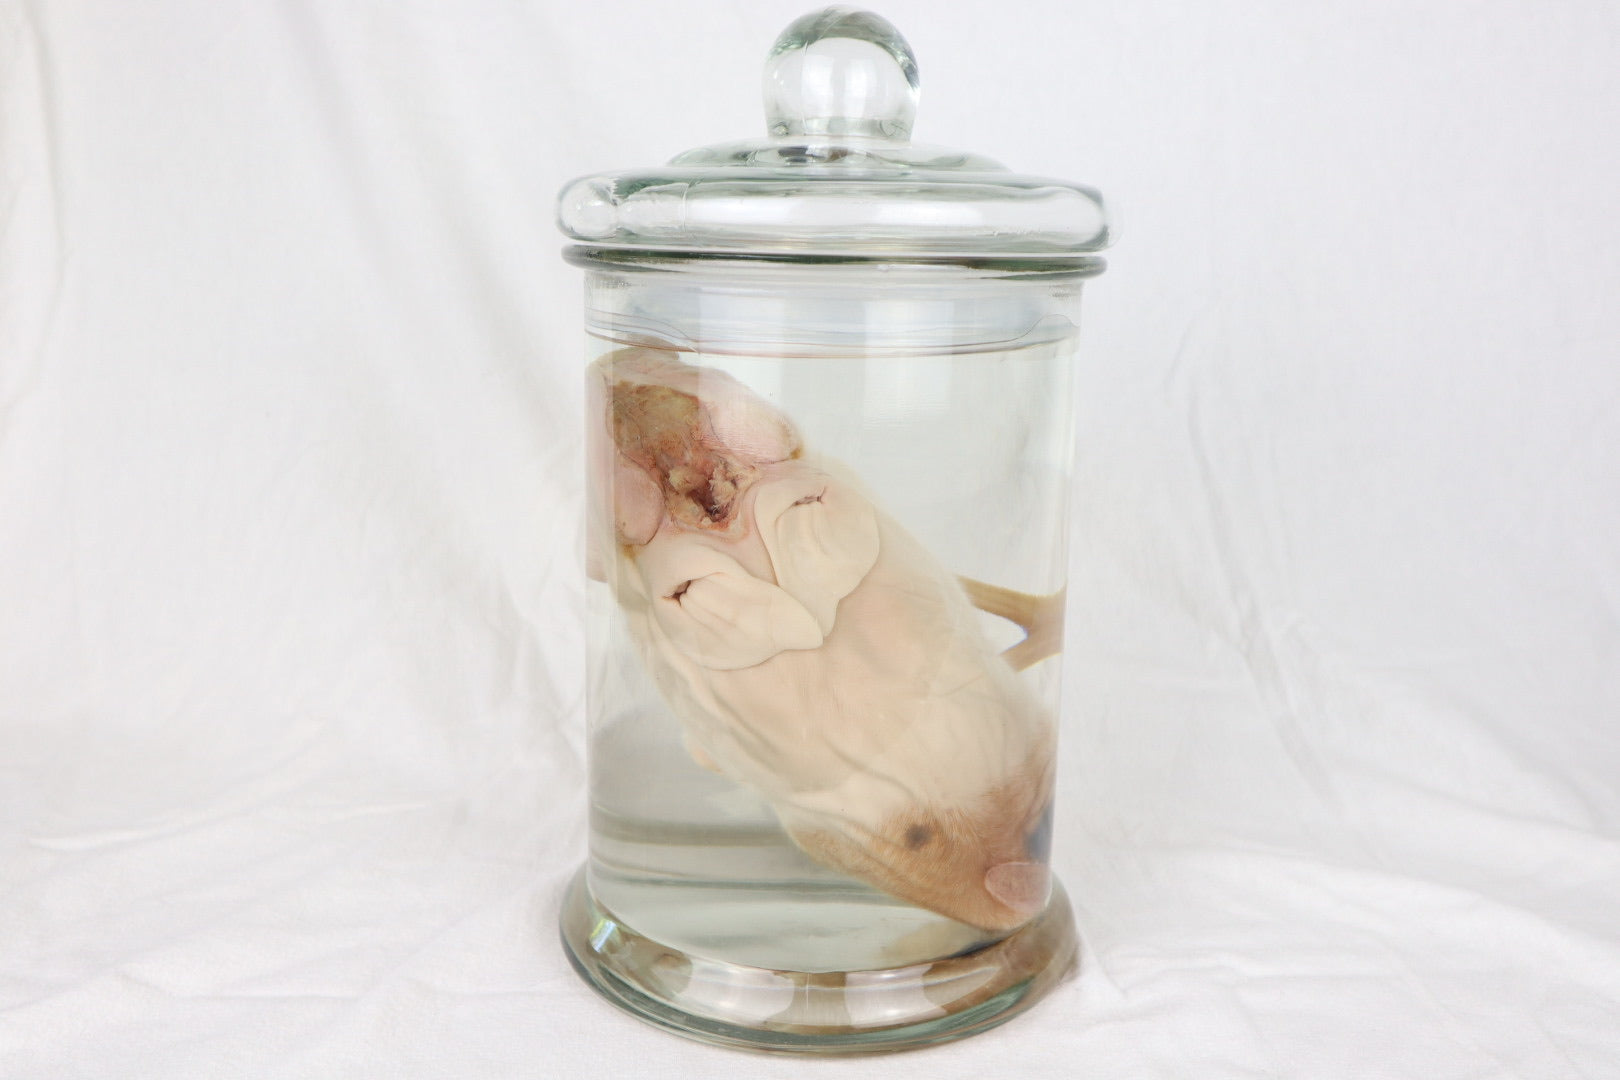 Reserved For Brianna - Wet Specimen Piglet with Congenital Disorders